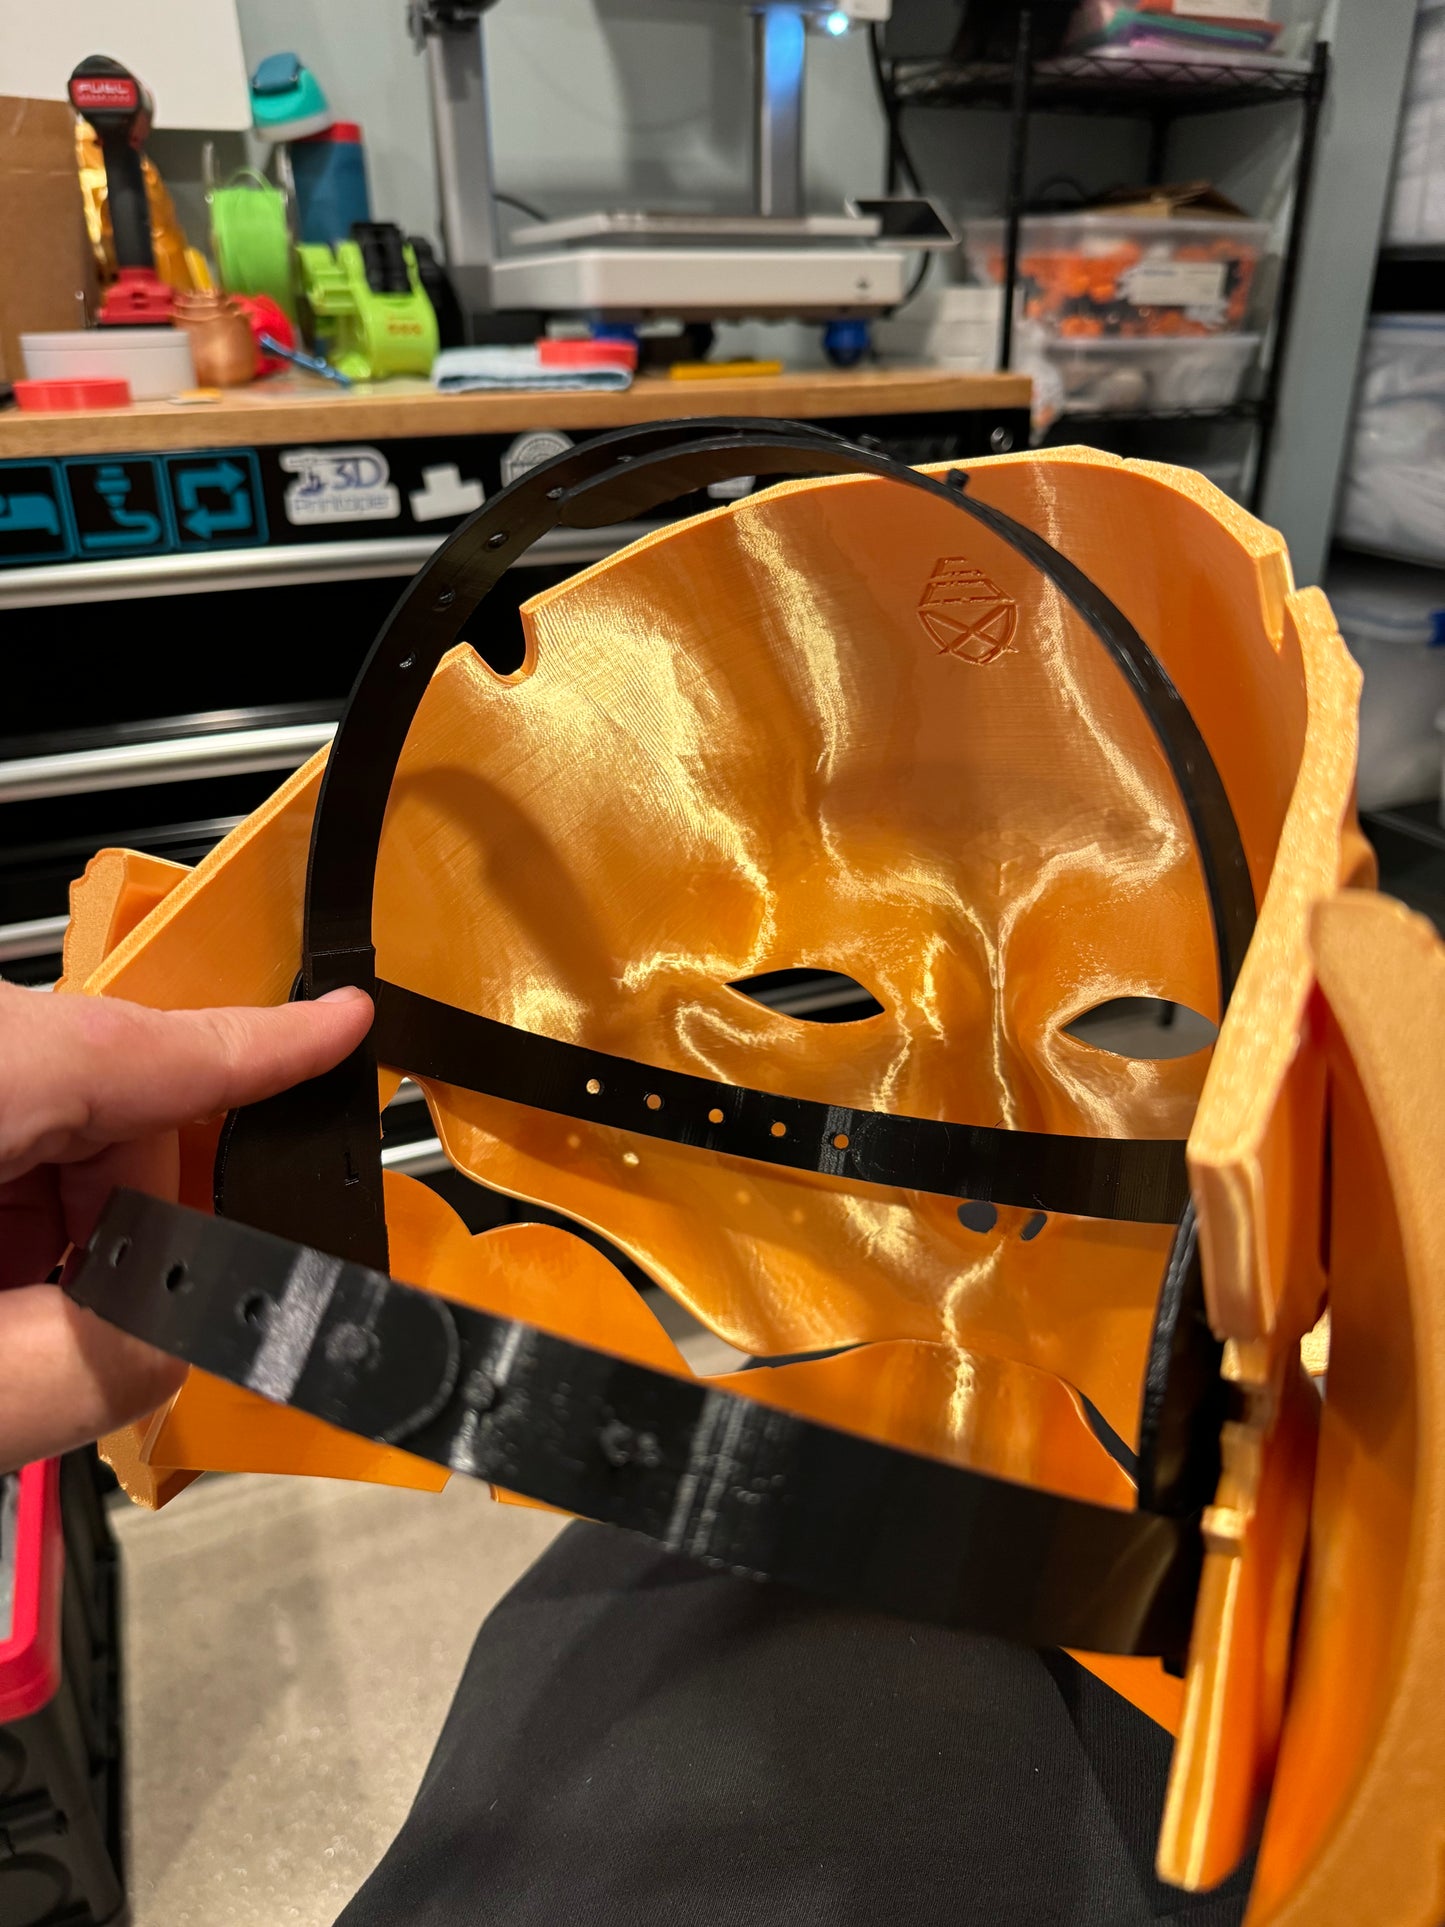 Droid Mask 3D printed